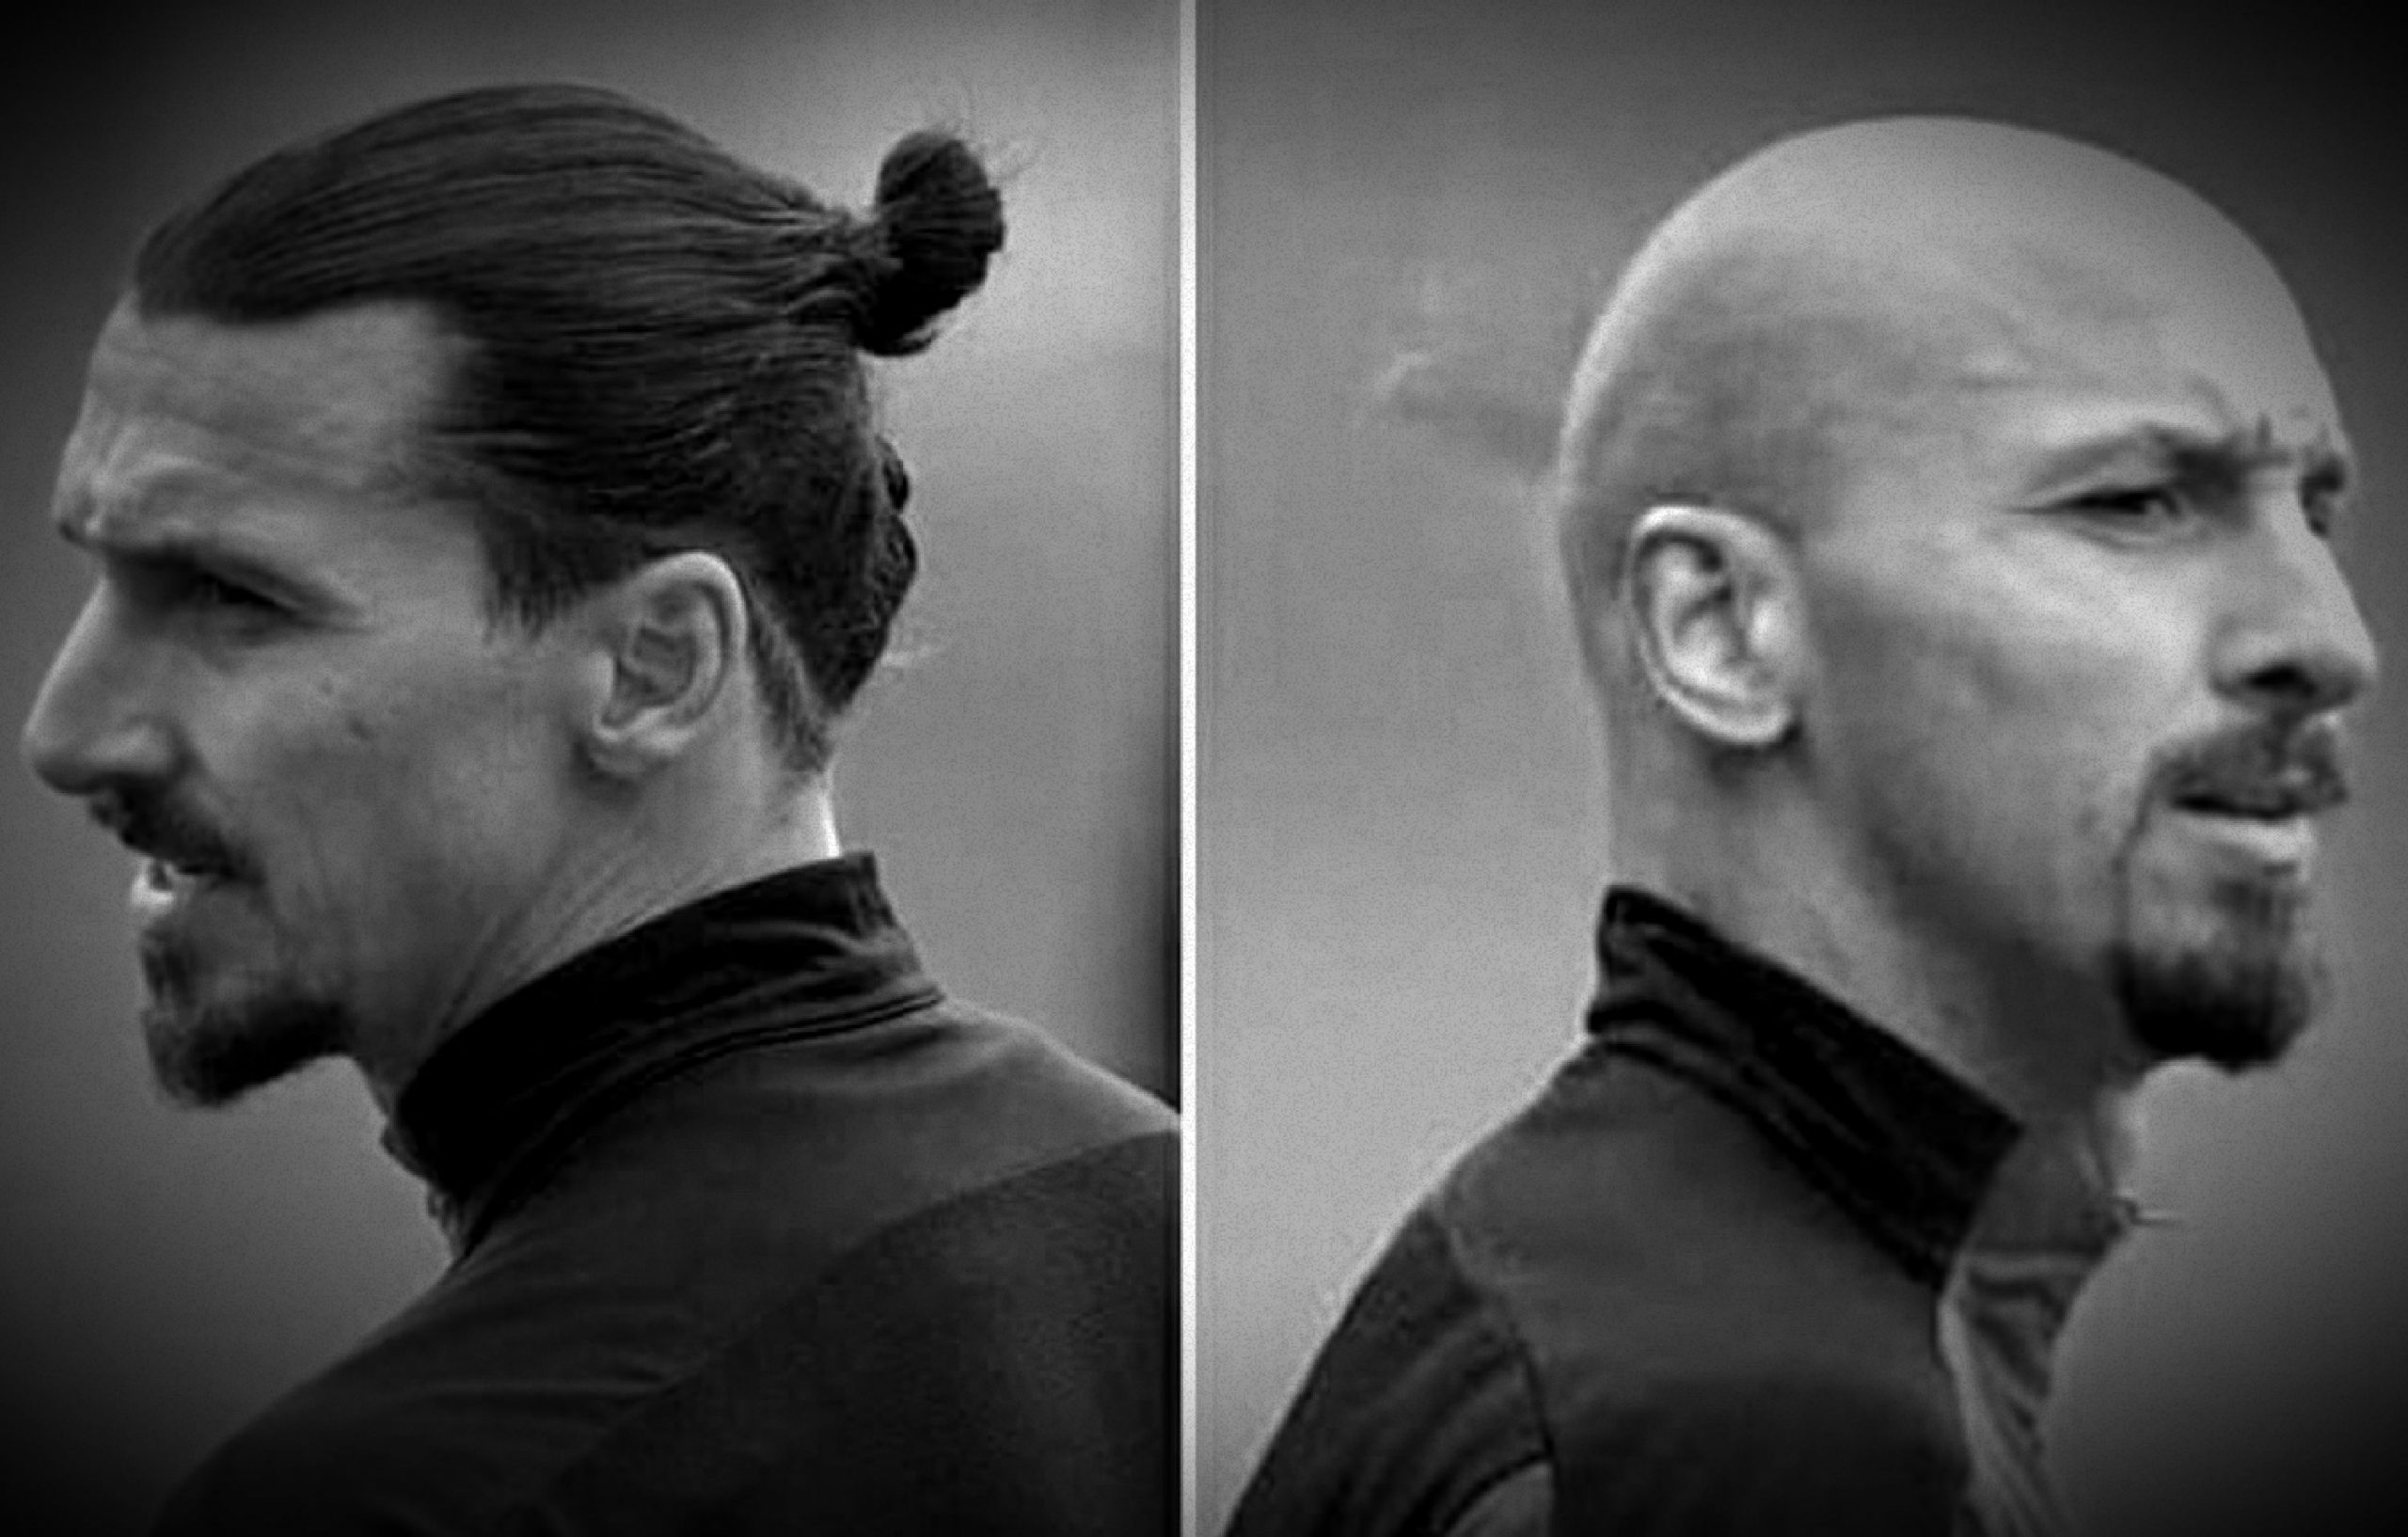 Photo – Zlatan Ibrahimovic appears to have chopped off his iconic ponytail for a new bald look